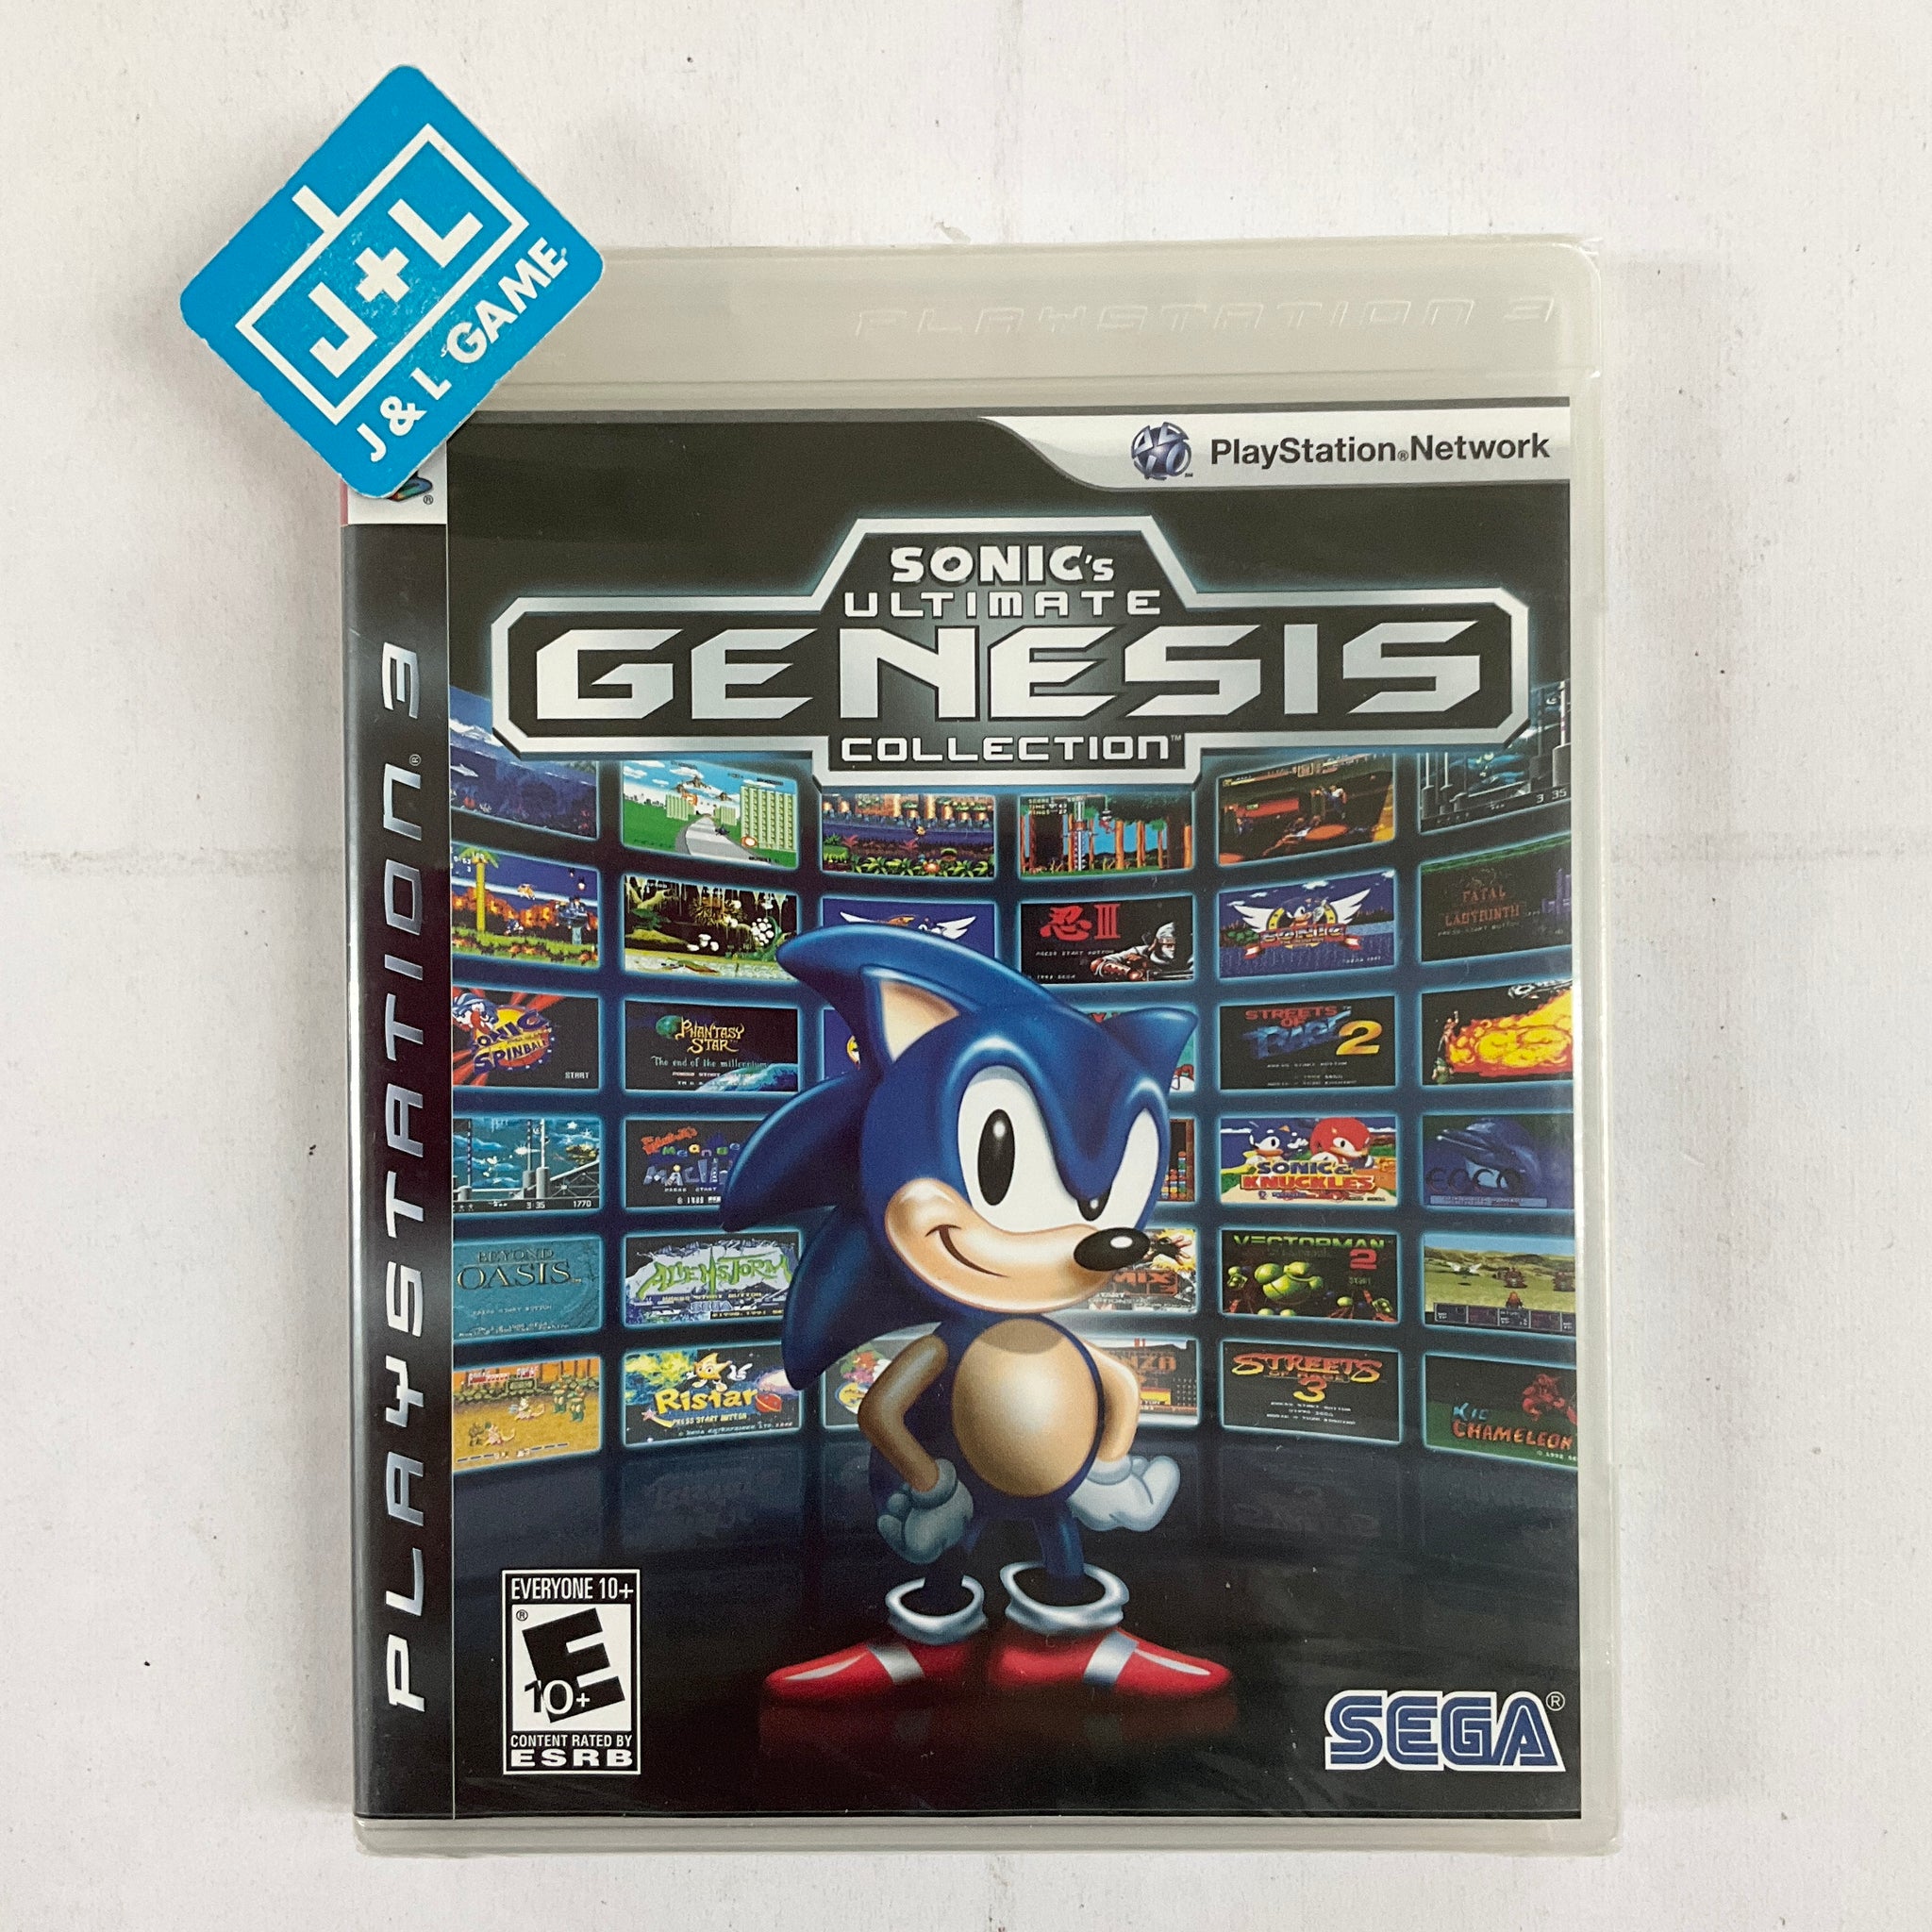 Sonic's Ultimate Genesis Collection Xbox 360 Game For Sale